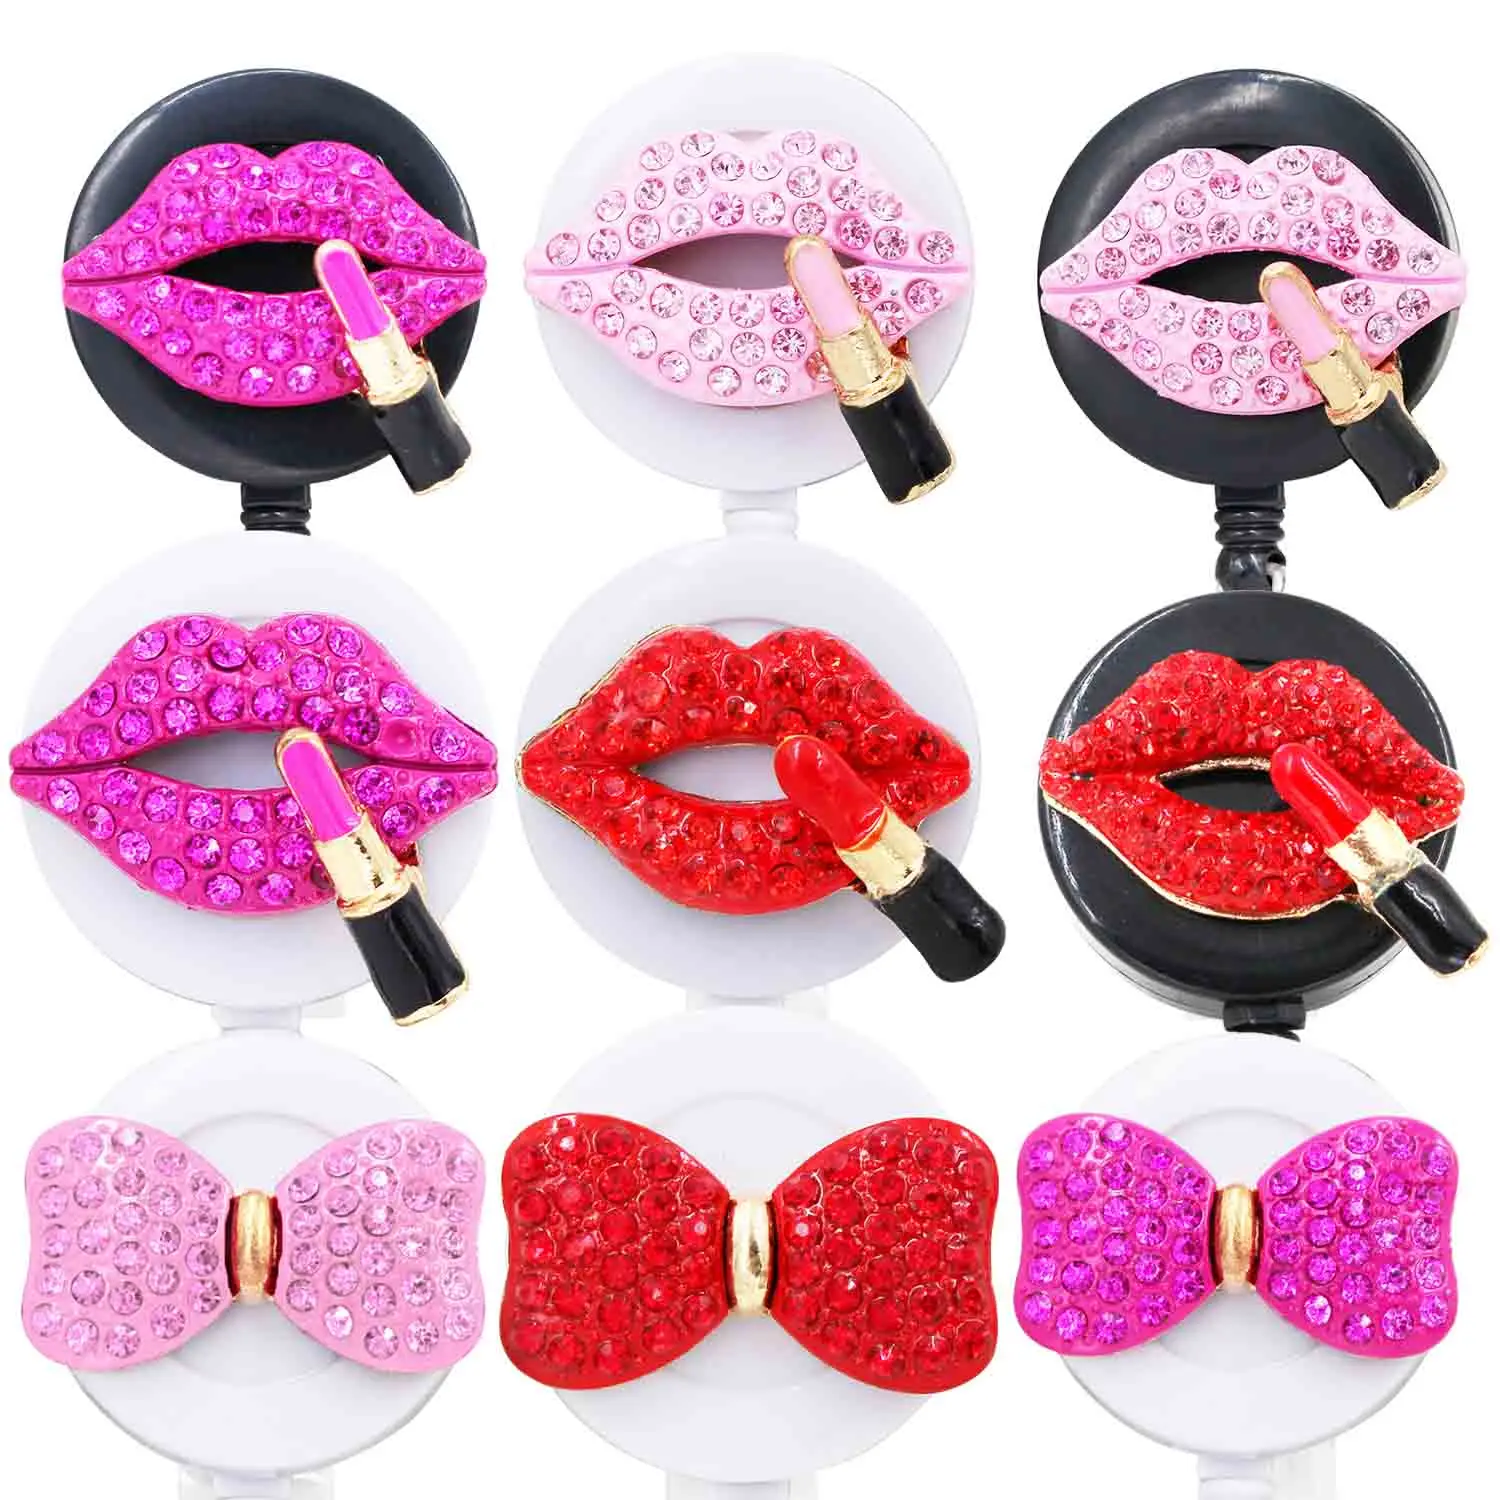 9pcs lot retractable badge holder with alligator clip retractable cord id badge reel fox dress girl horse style free global shipping